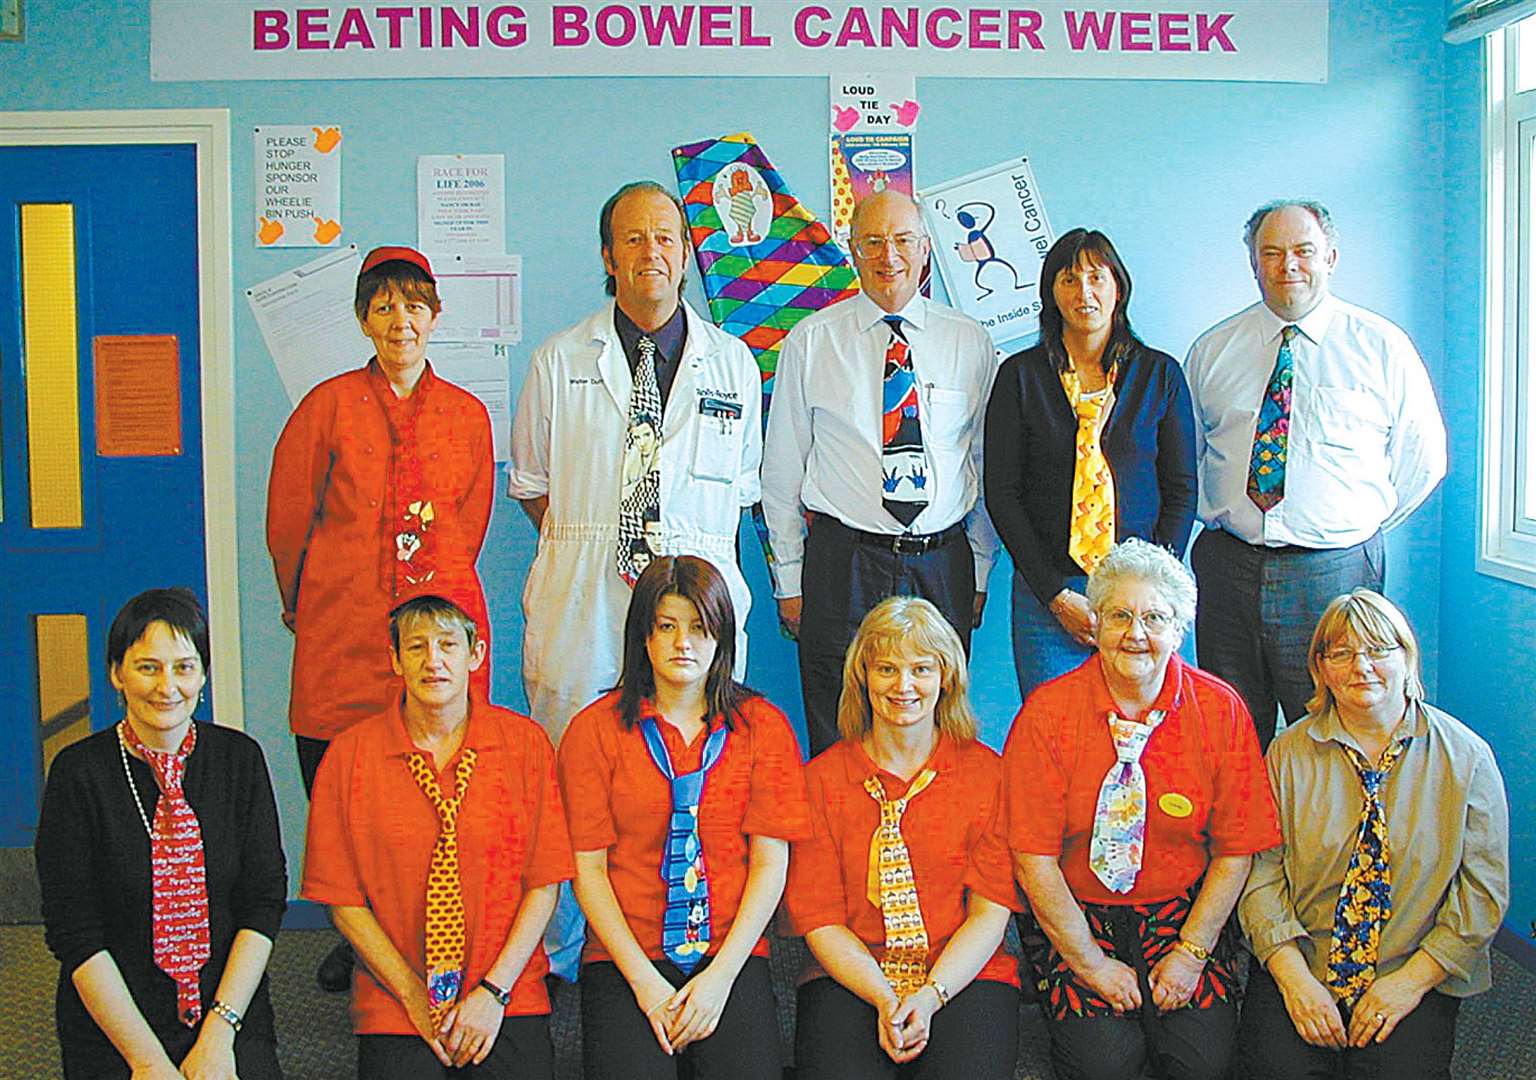 Rolls-Royce and Sodexho at Vulcan took part in a ‘loud tie’ competition as part of Bowel Cancer Awareness Week in 2006, raising over £200.